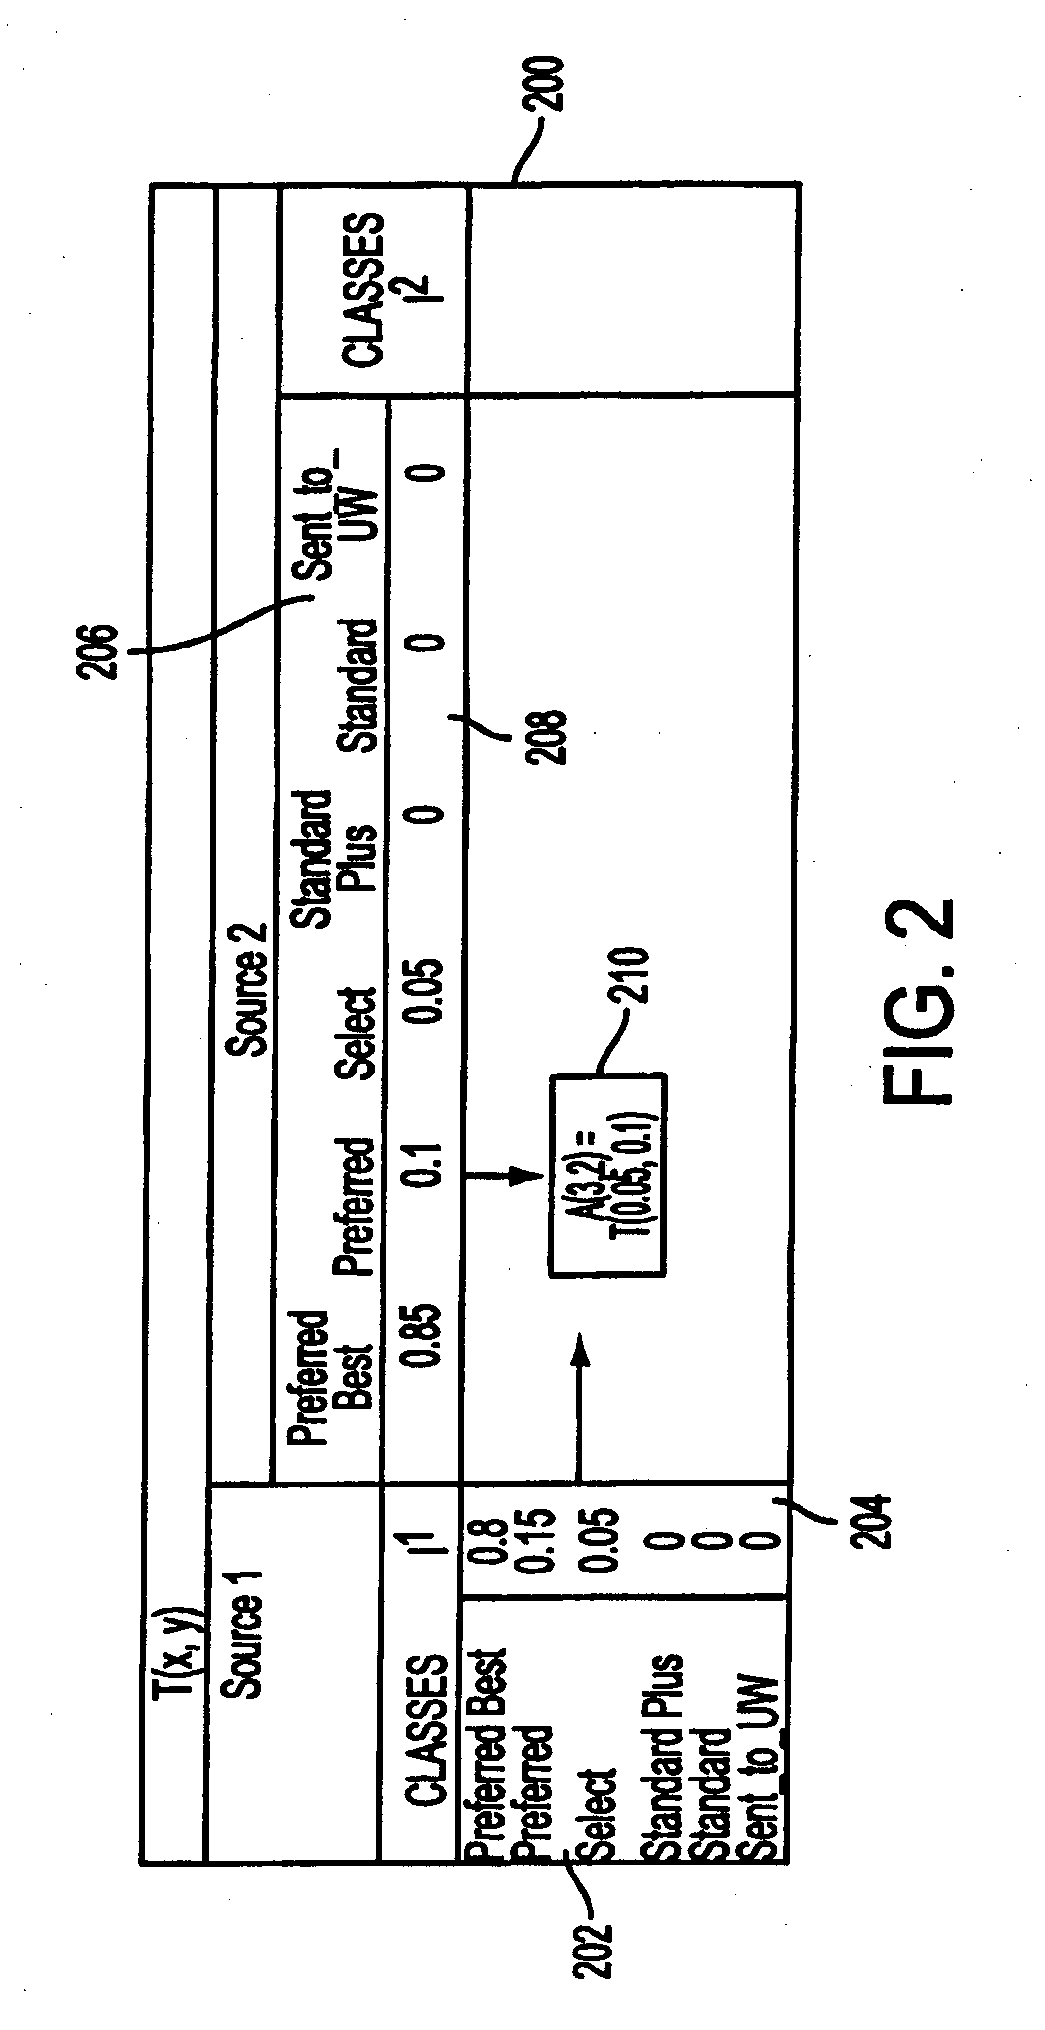 System and process for a fusion classification for insurance underwriting suitable for use by an automated system